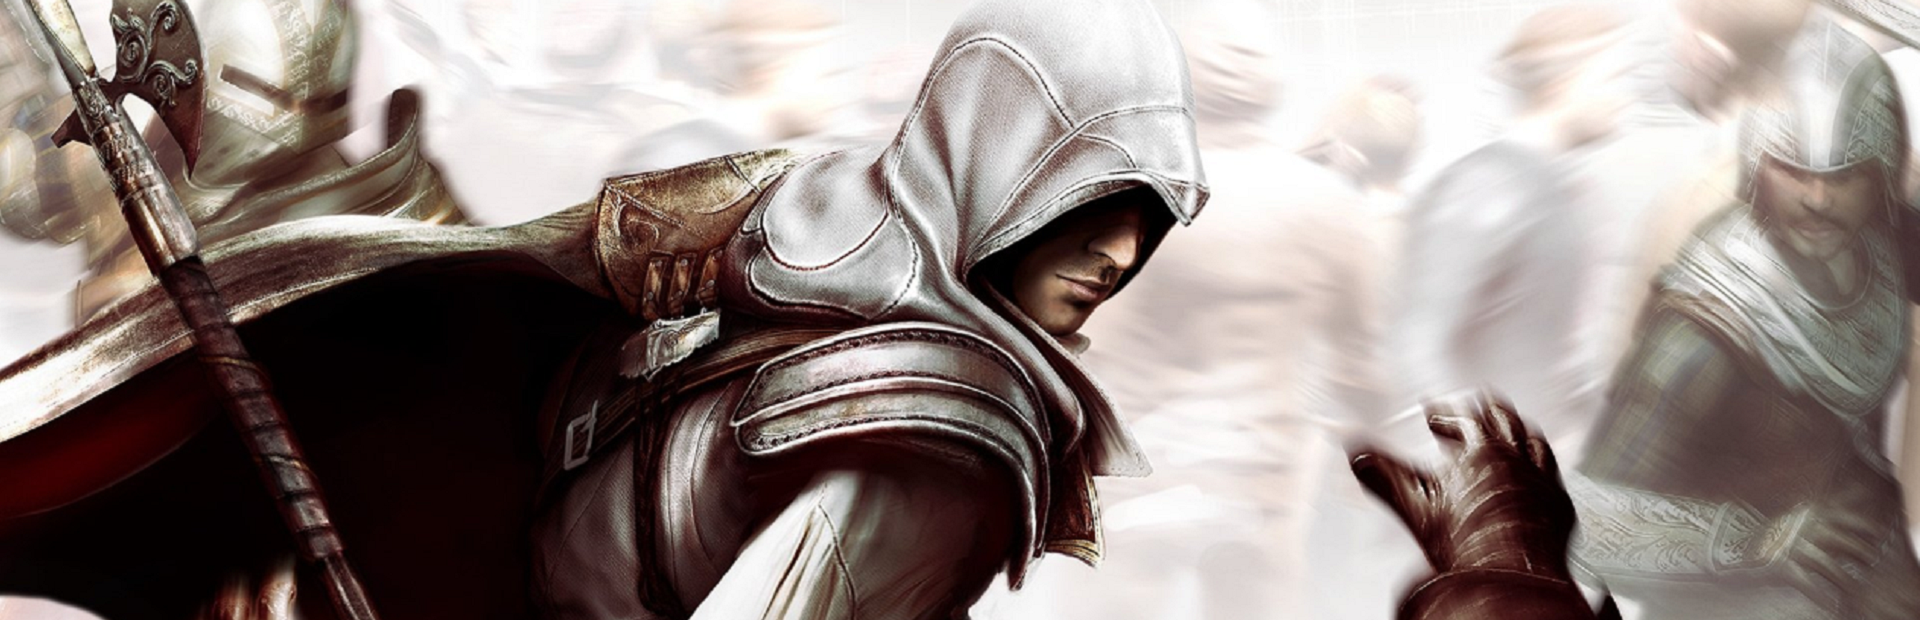 Assassin's Creed 2: Discovery' – Ezio steals into the AppStore – TouchArcade